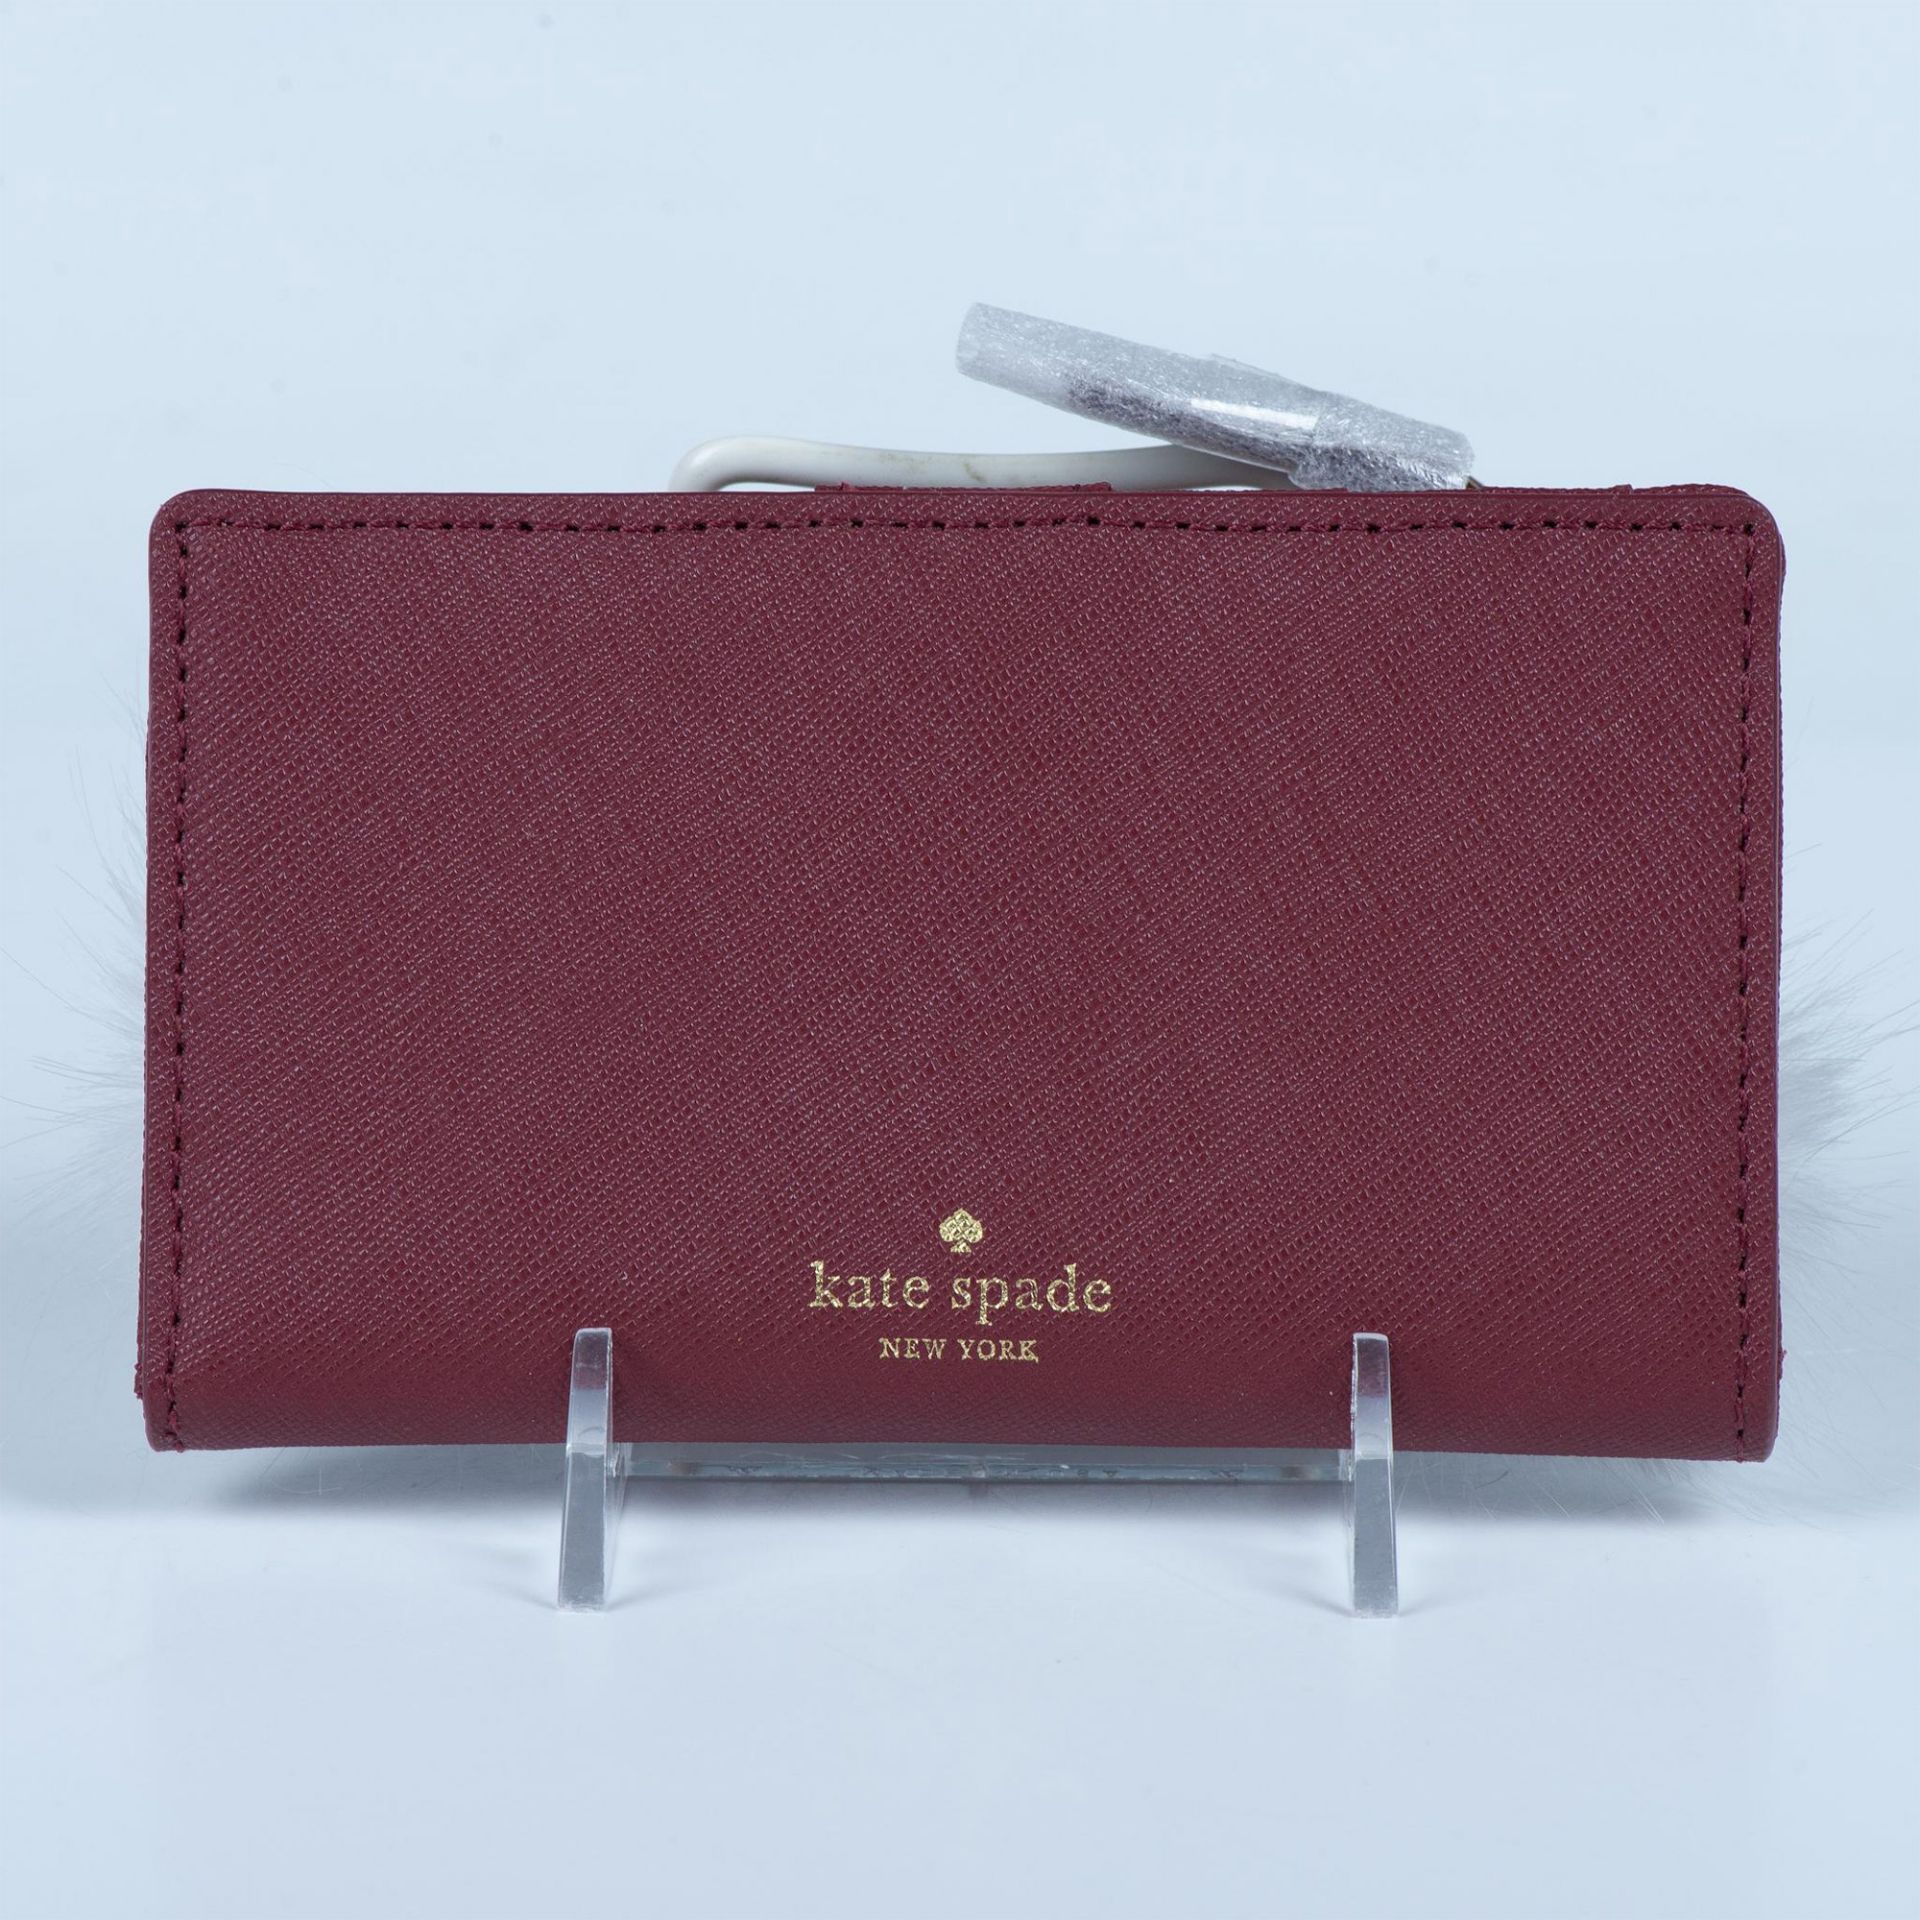 Kate Spade Fox Mikey Wallet - Image 6 of 10